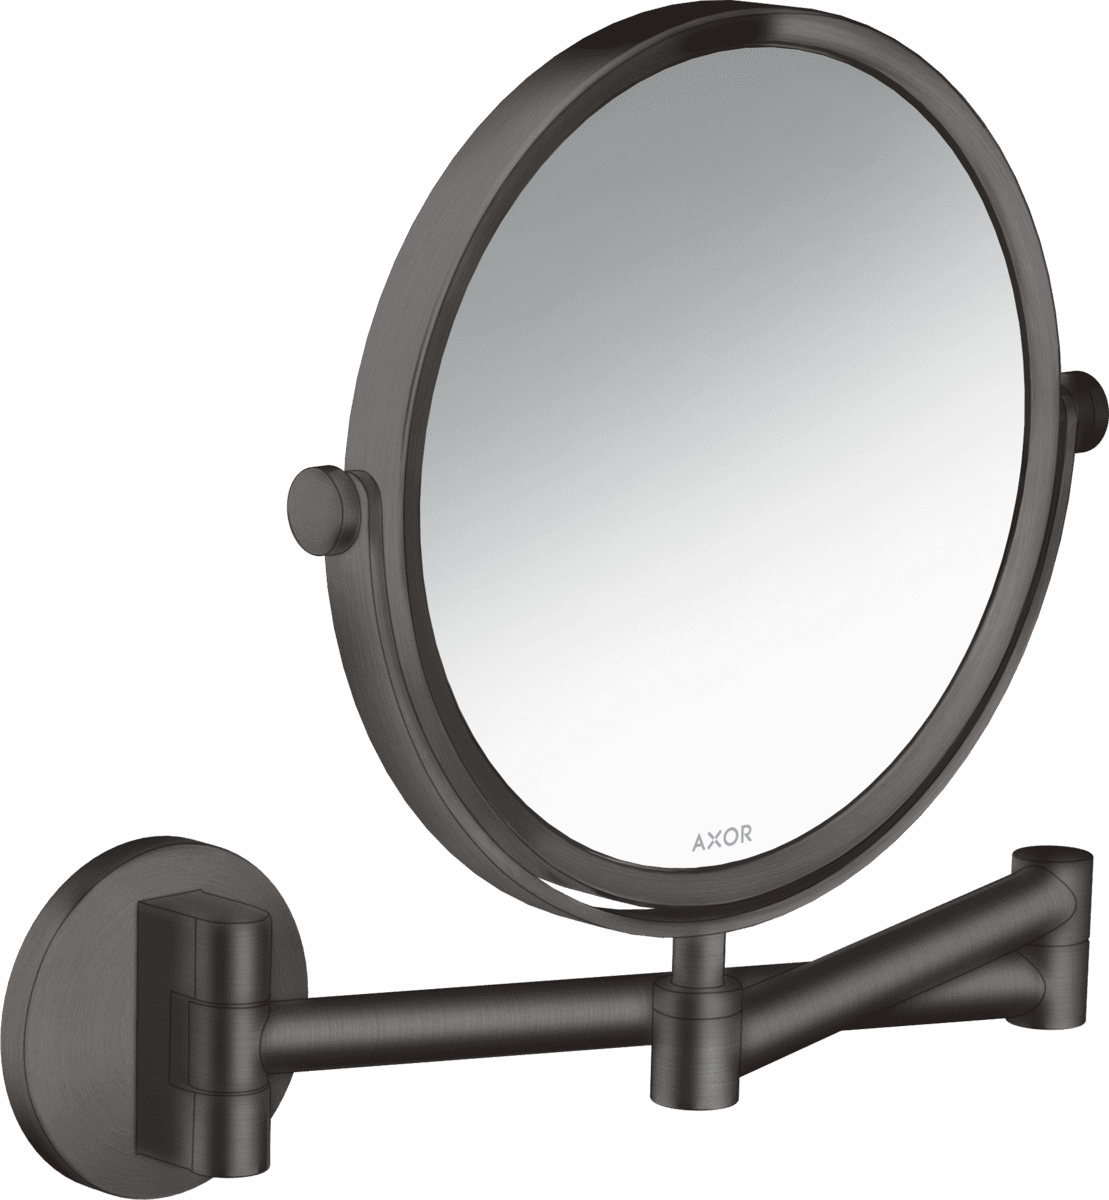 Picture of HANSGROHE AXOR Universal Circular Shaving mirror #42849340 - Brushed Black Chrome